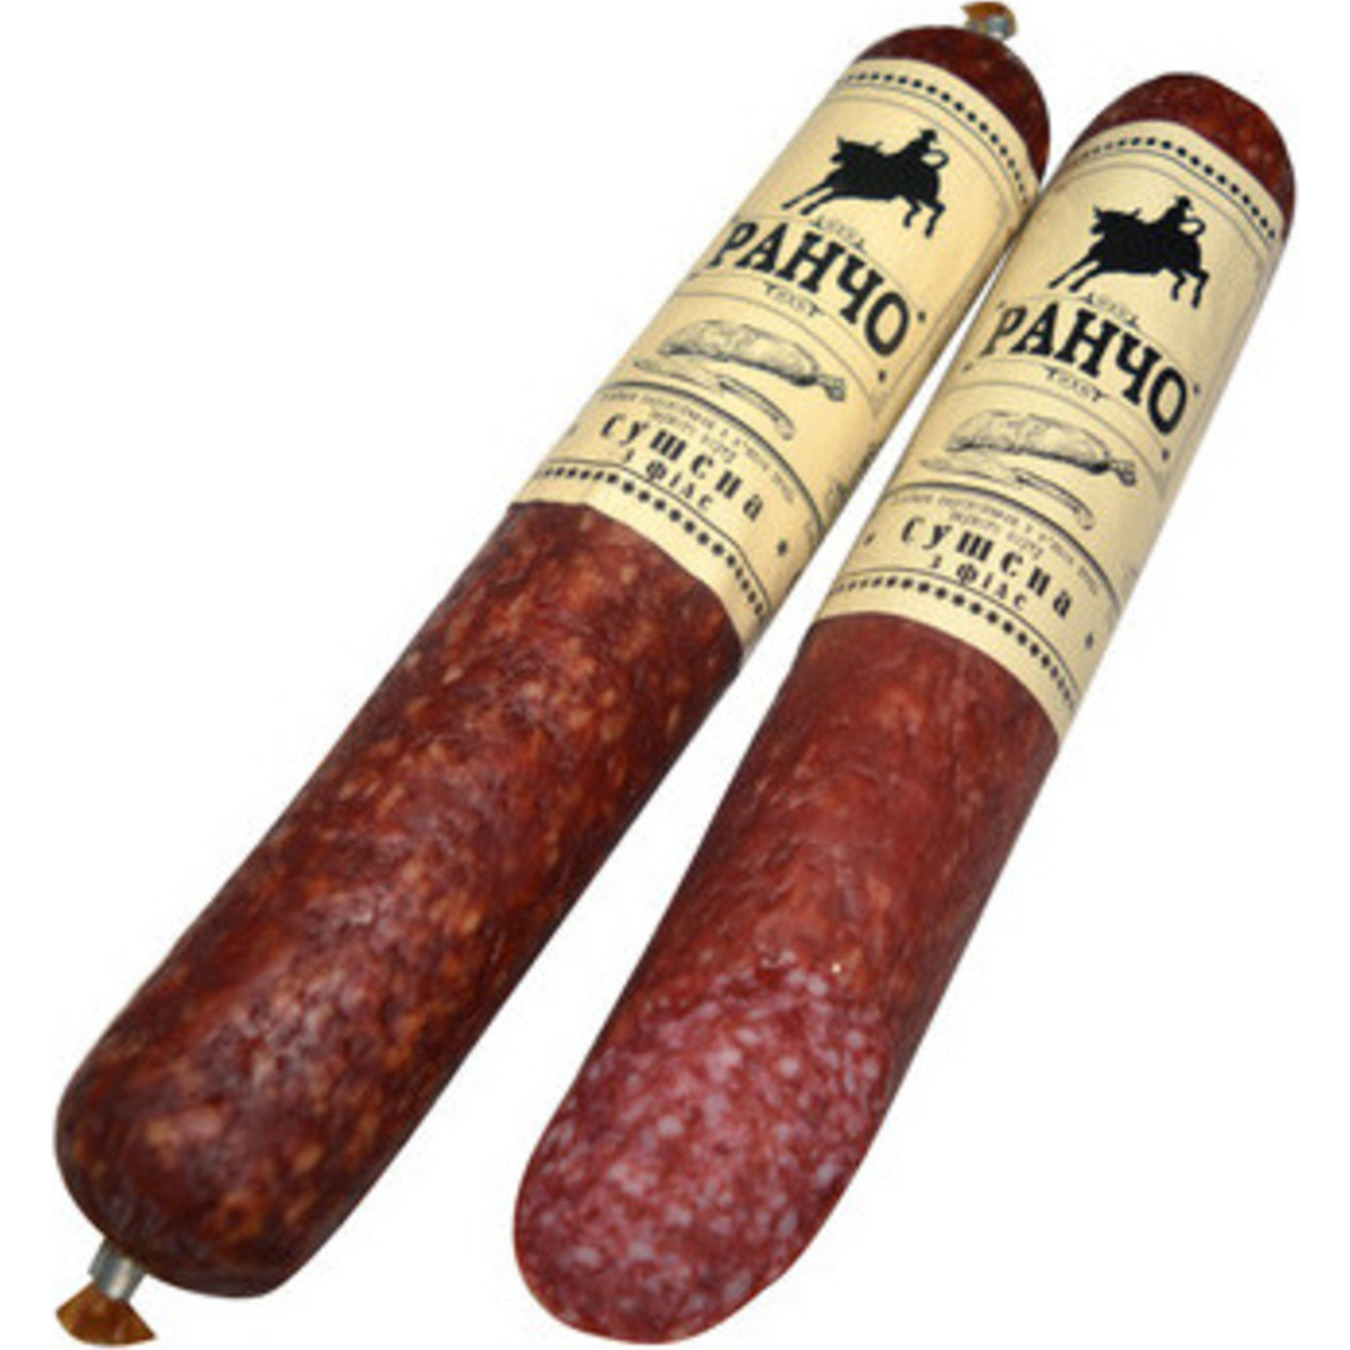 Rancho raw smoked poultry sausage 340g